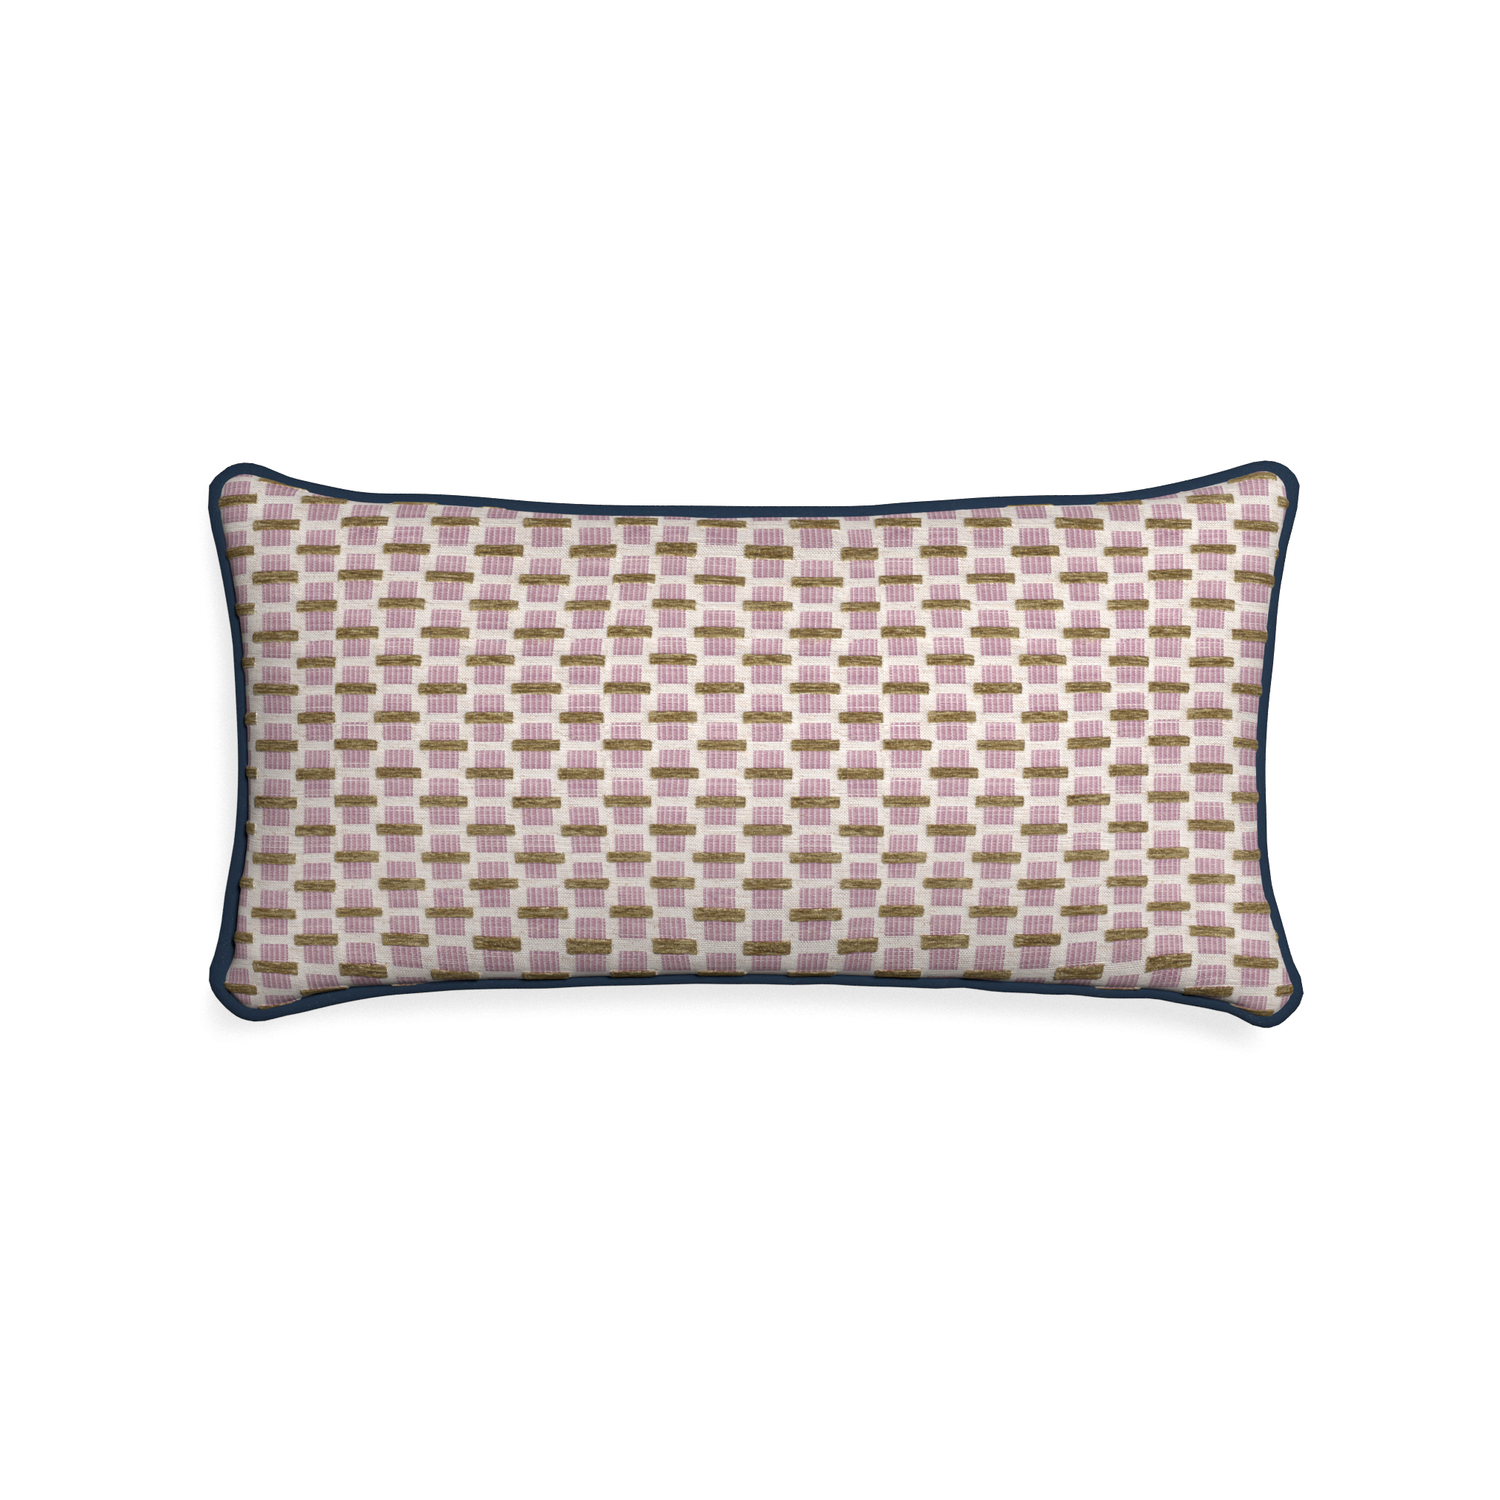 Midi-lumbar willow orchid custom pink geometric chenillepillow with c piping on white background